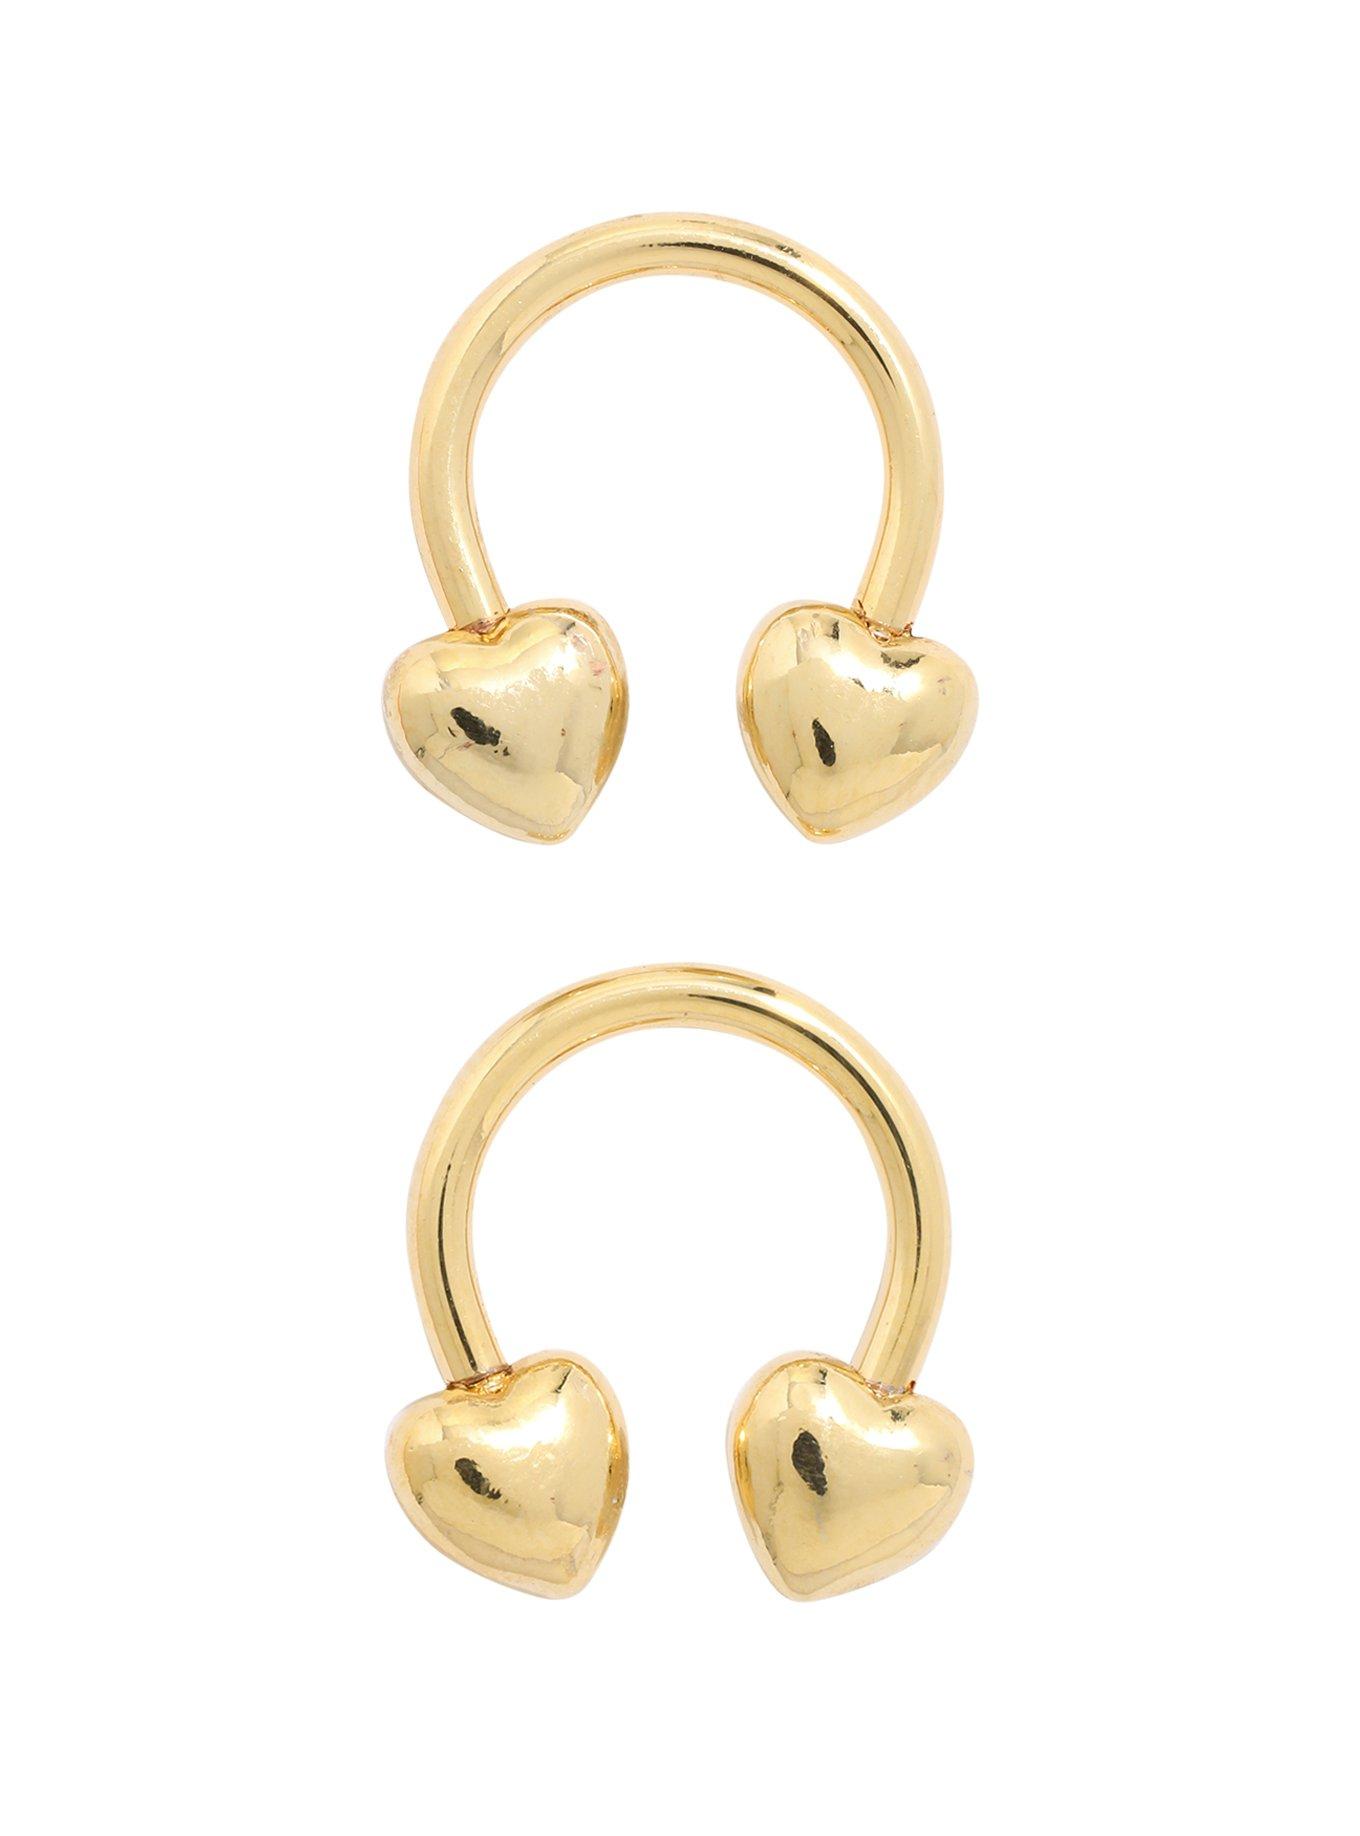 Steel Gold Plated Heart Circular Barbell 2 Pack, GOLD, hi-res